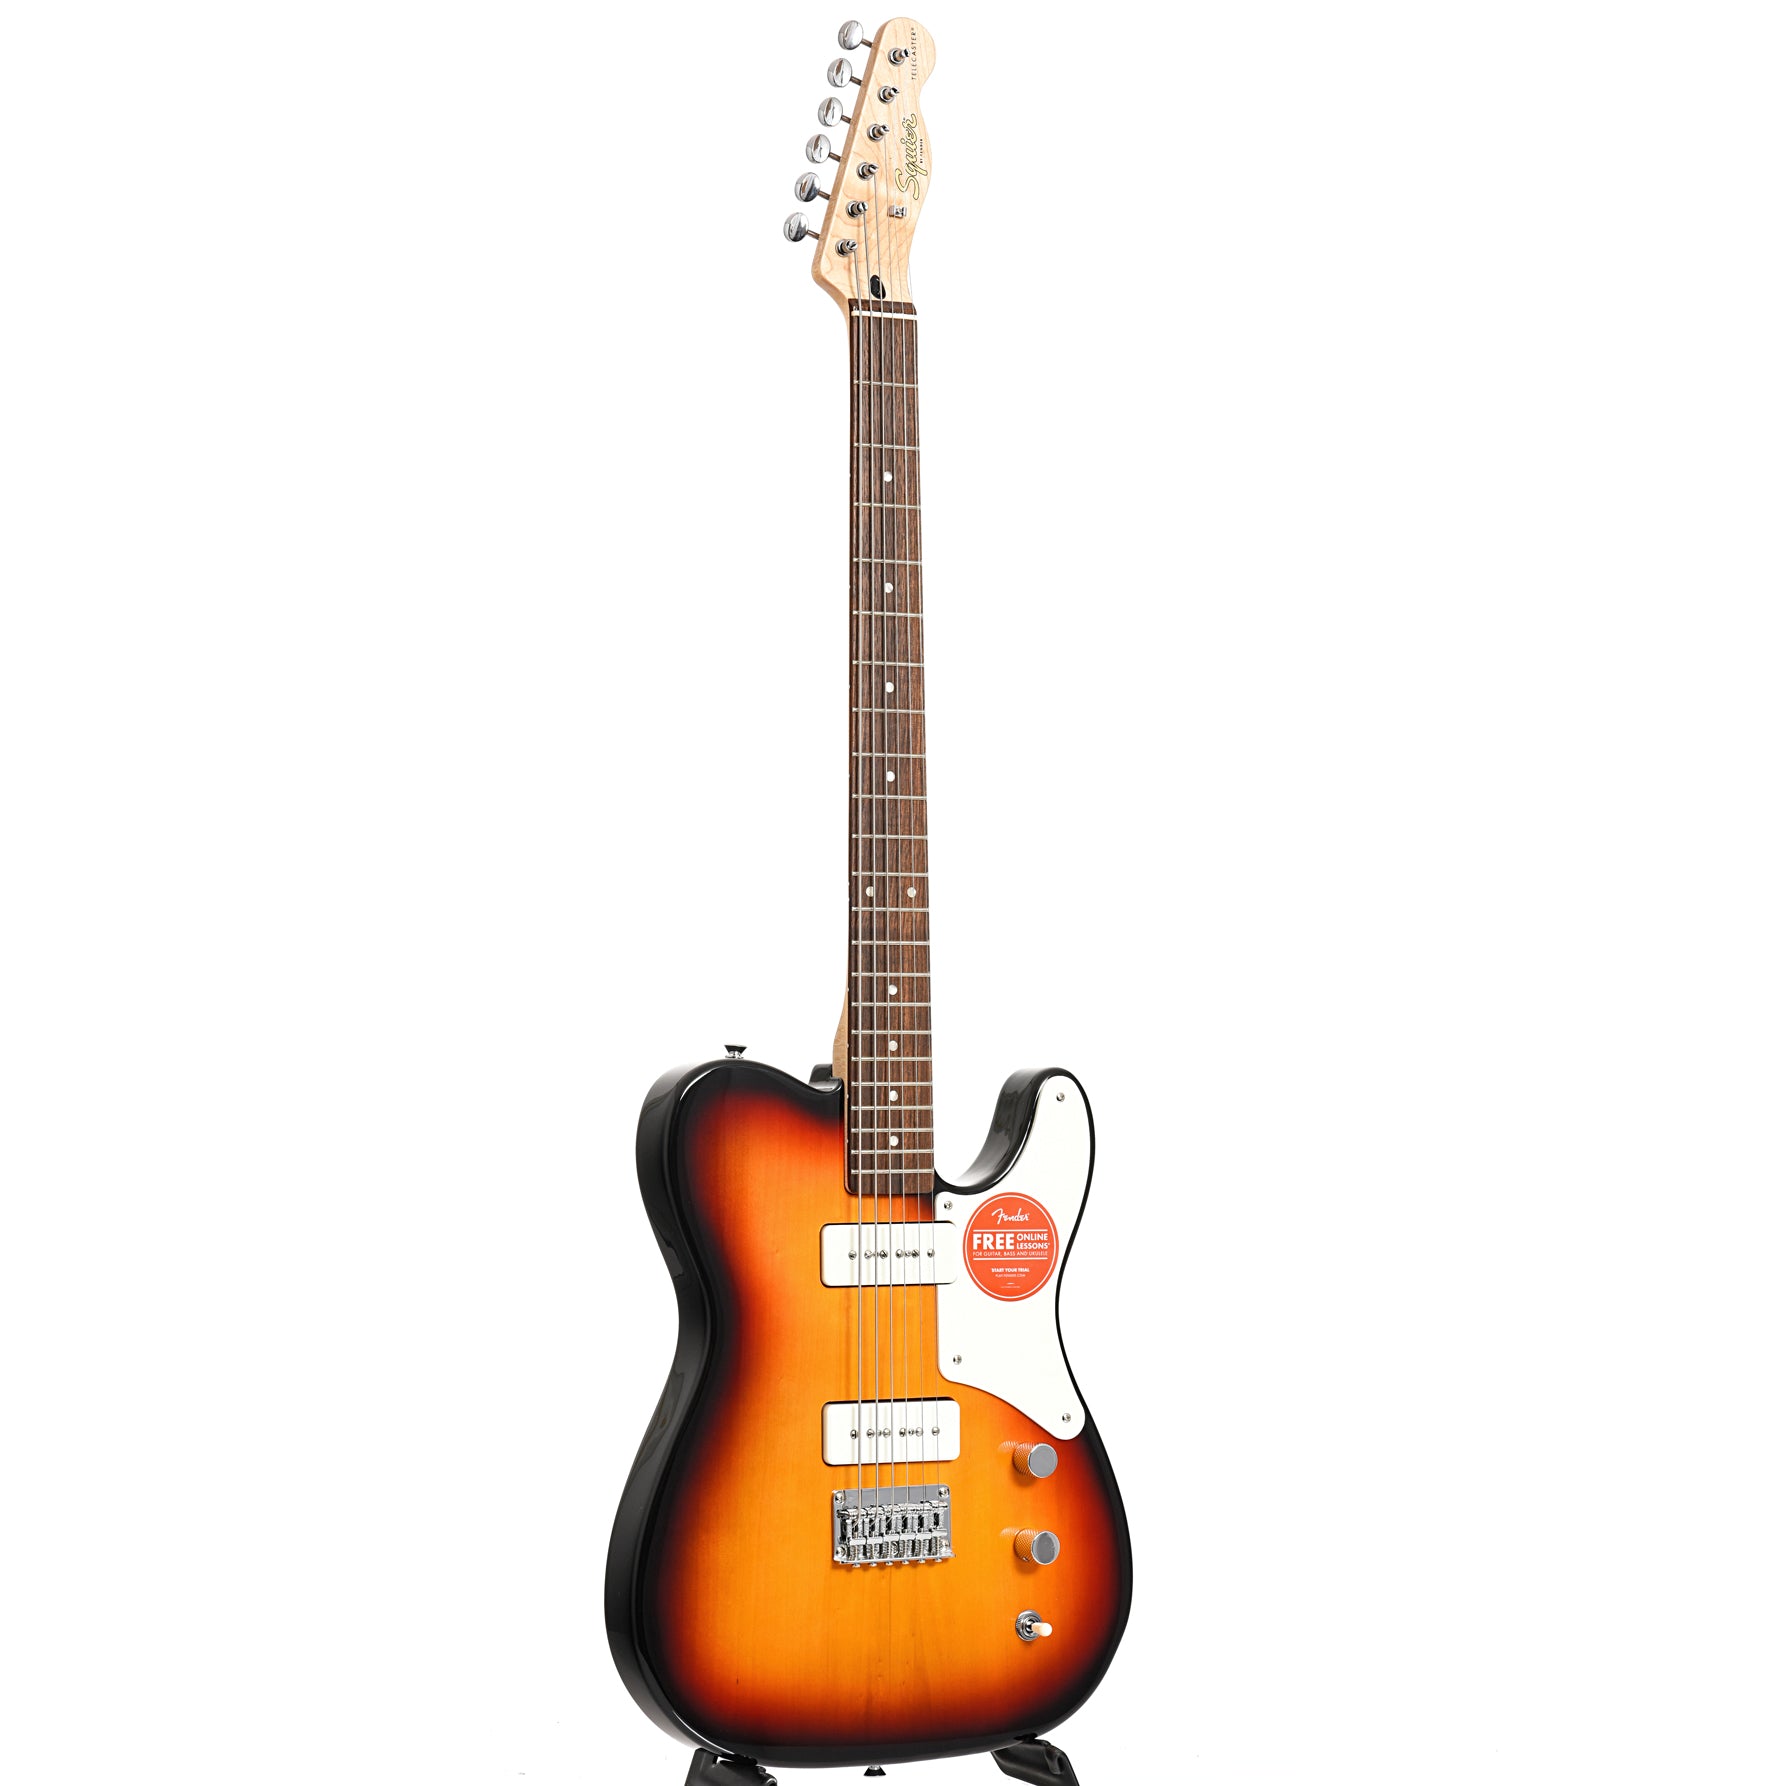 Image 11 of Squier Paranormal Baritone Cabronita Telecaster, 3-Color Sunburst - SKU# SPBARICT-3TS : Product Type Other : Elderly Instruments